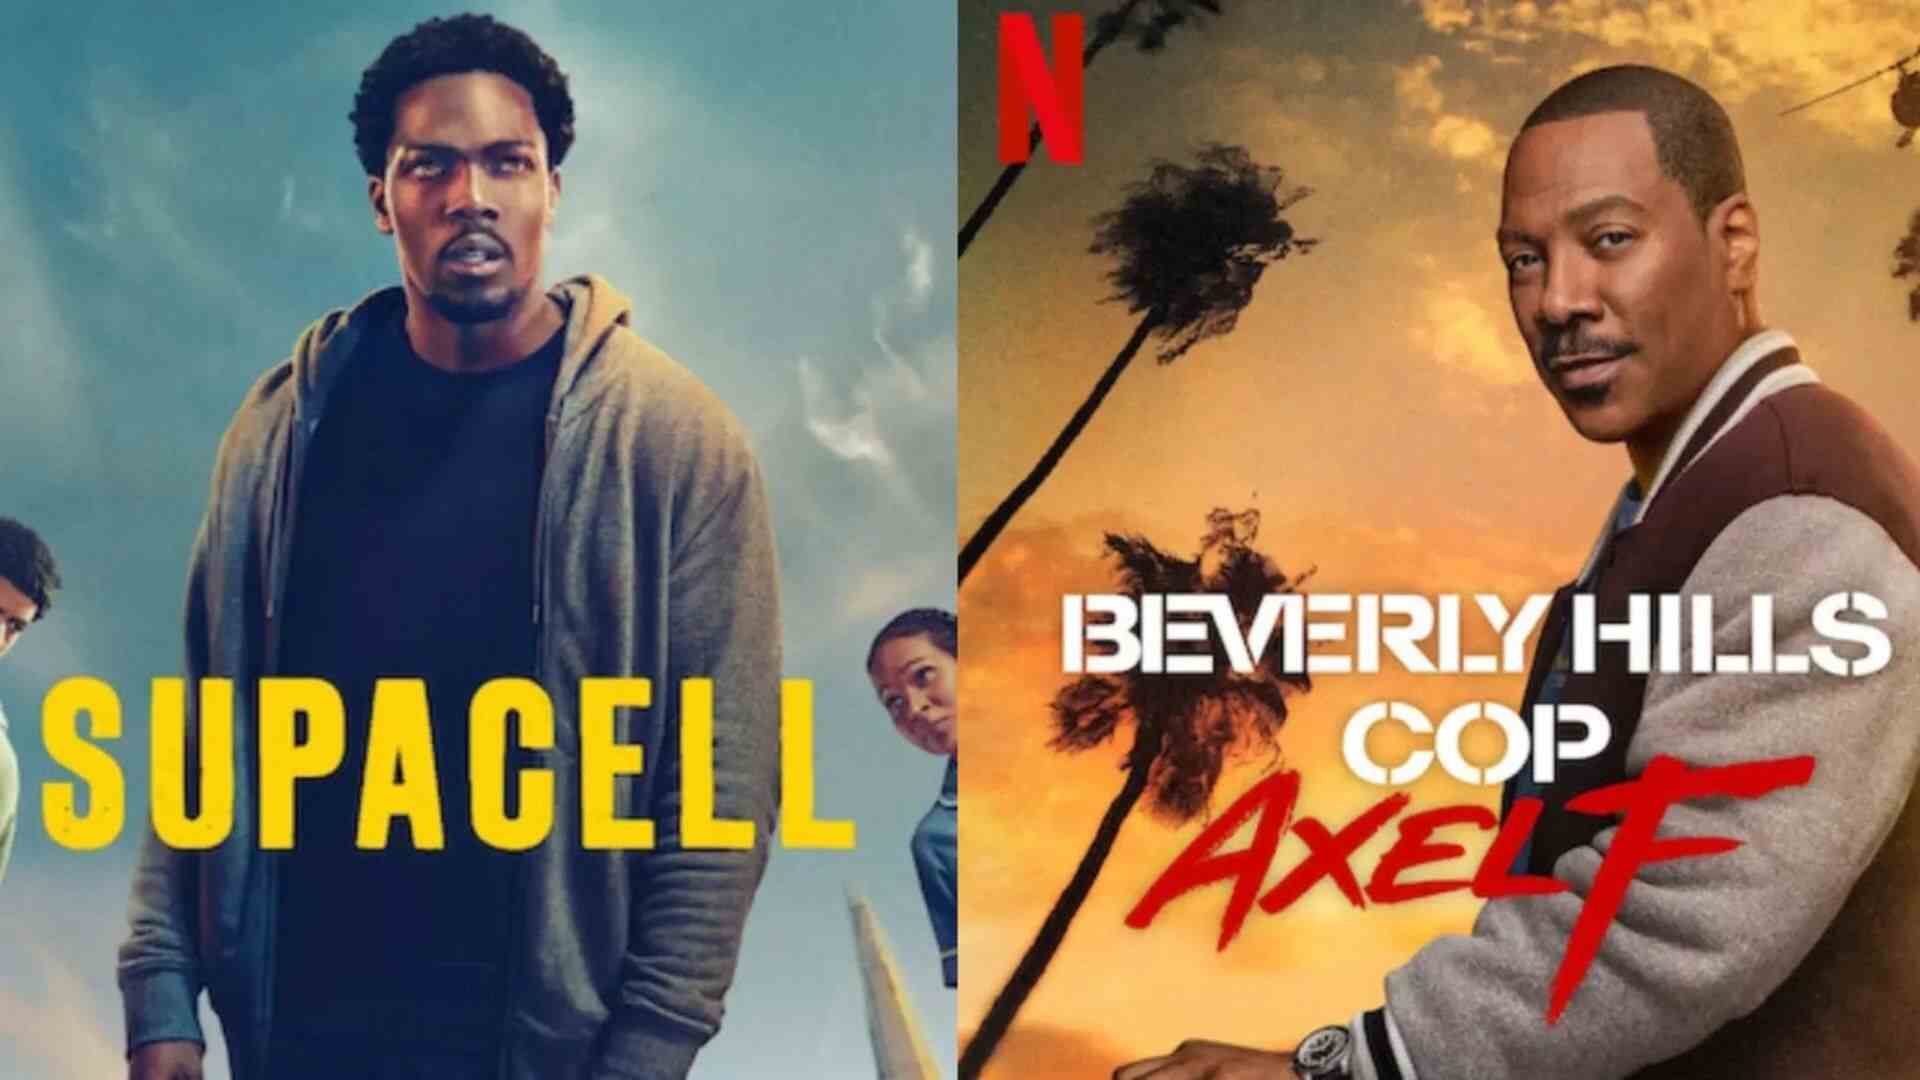 Netflix’s Latest Top 10: Supacell Ousts Bridgerton As Beverly Hills Cop Axel F Claims First Place